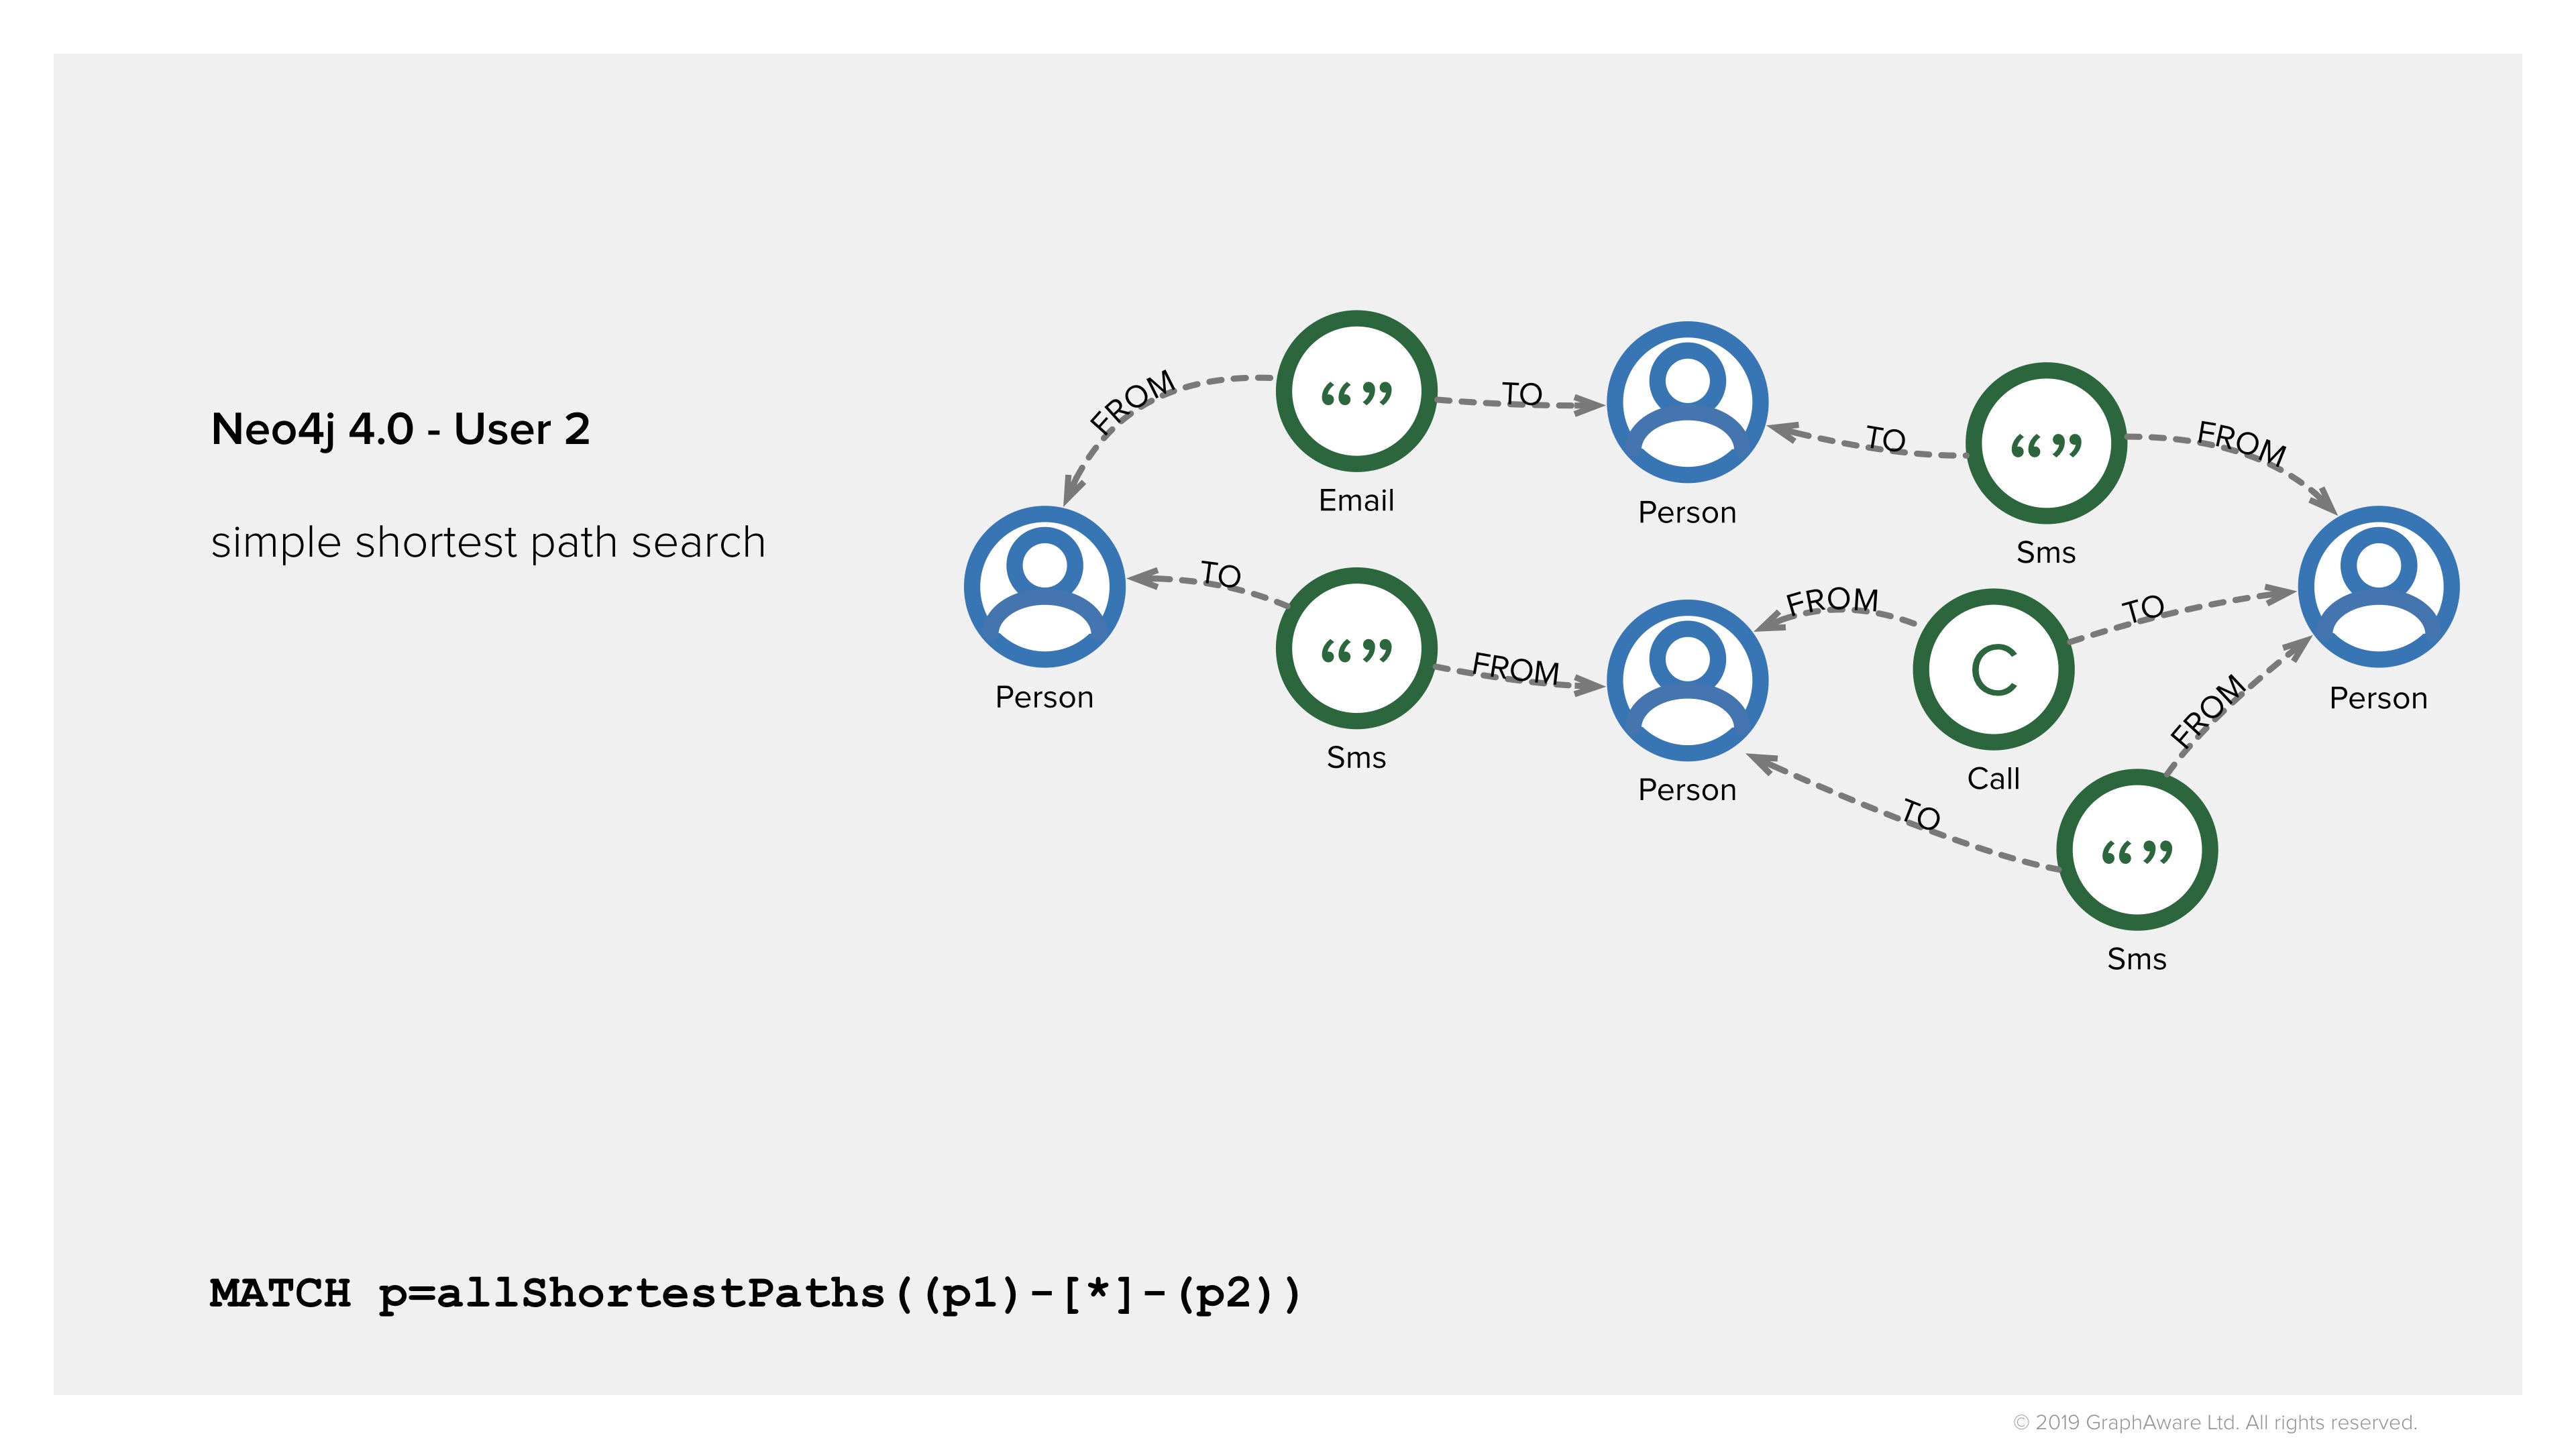 Find shortest paths in Neo4j 4.0 for law enforcement - access control